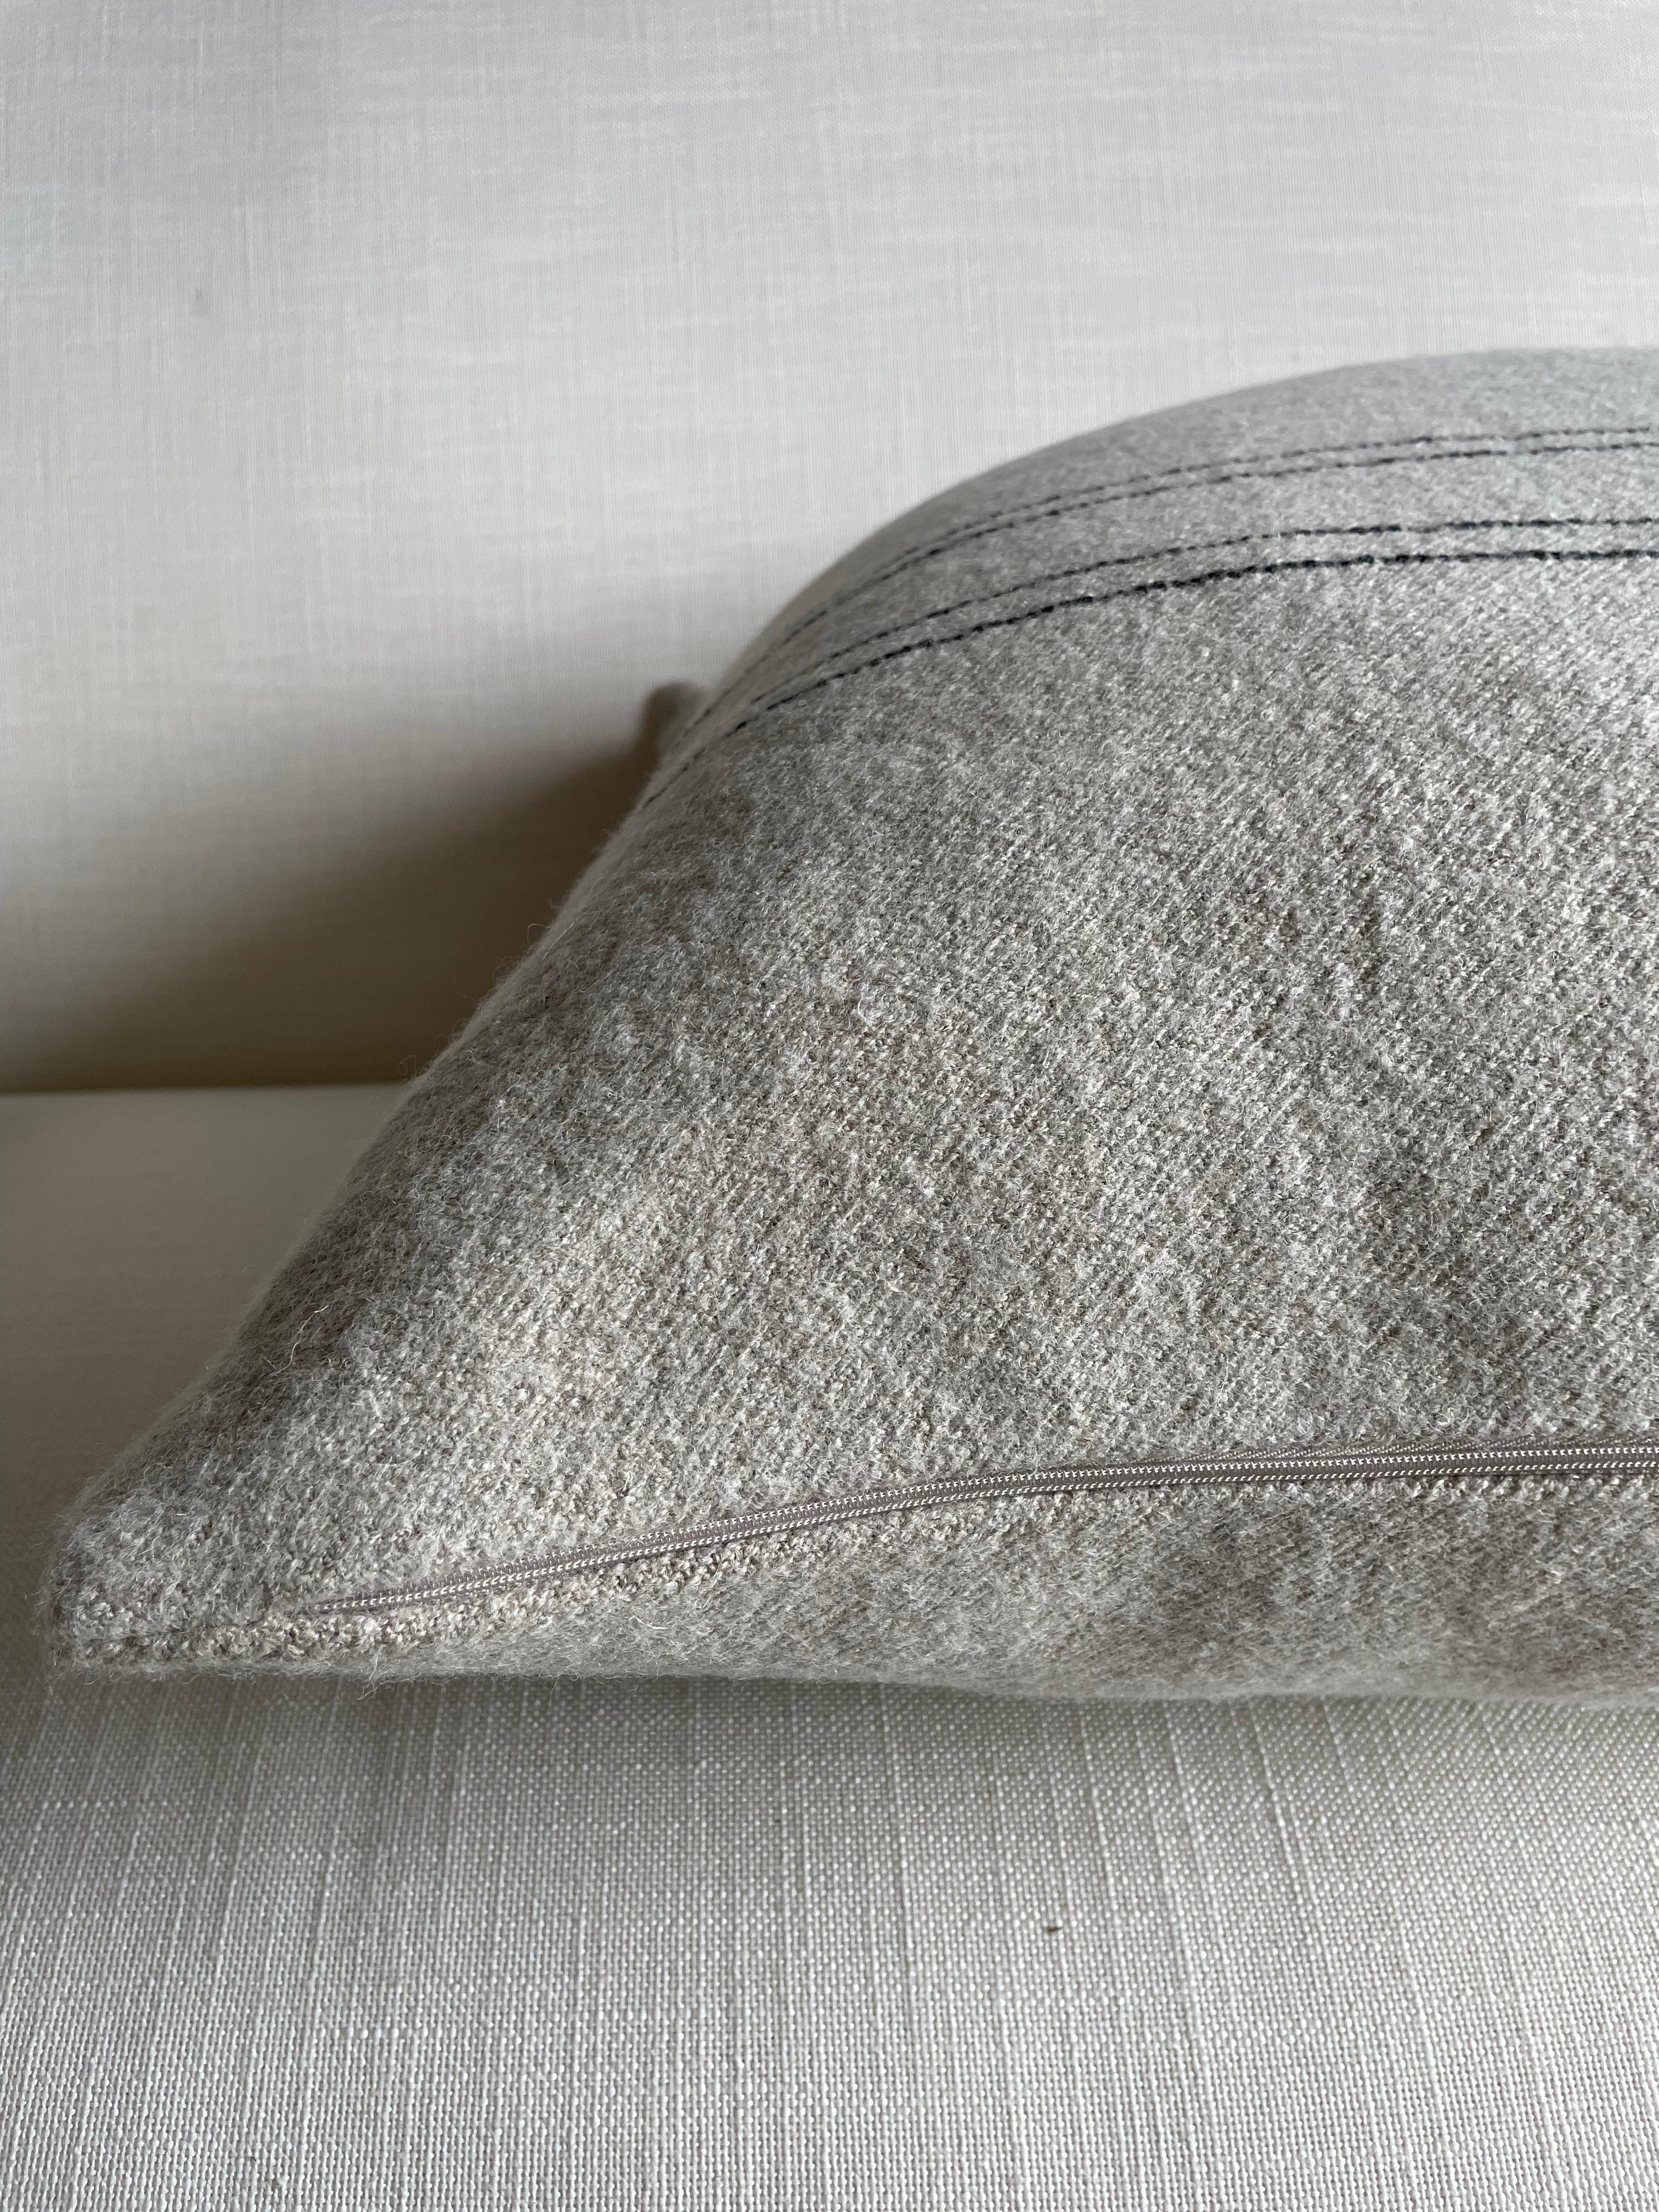 Belgian Linen and Wool Oversize Pillow Cover in Oatmeal and Coal with Insert For Sale 2